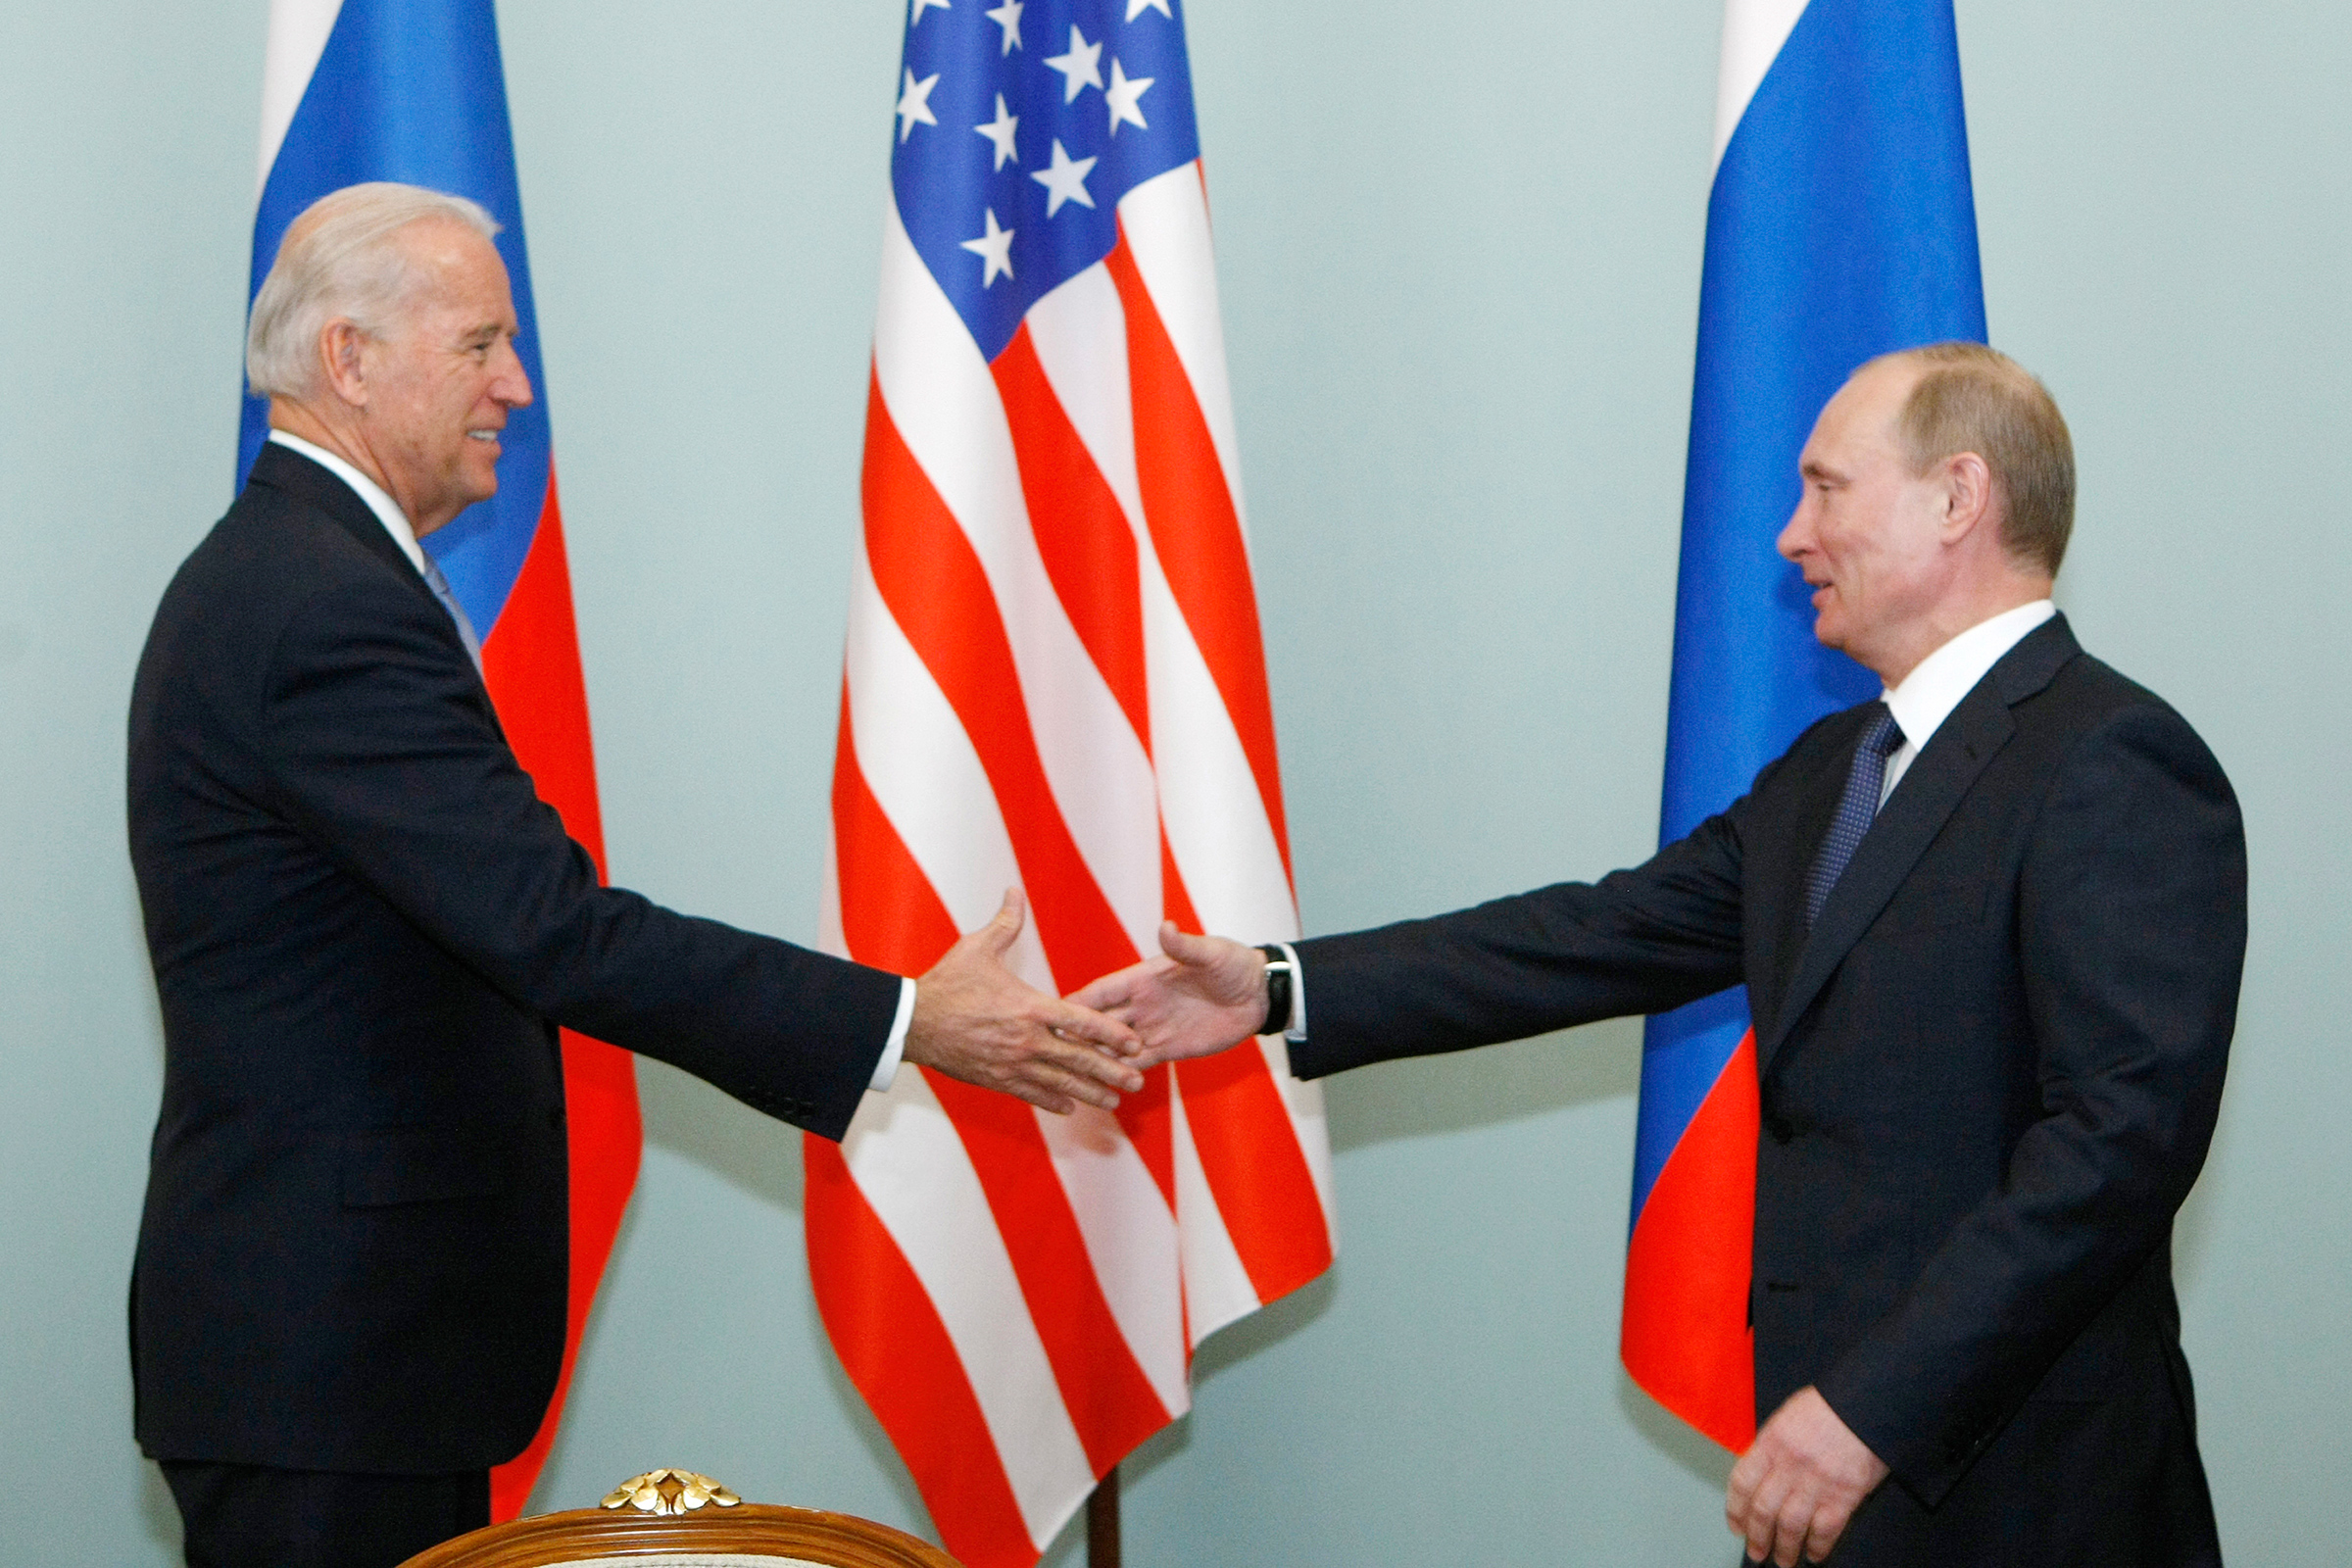 Putin Warns Biden That New Sanctions  Because Of Ukraine Crisis Would Be A 'Colossal Mistake'